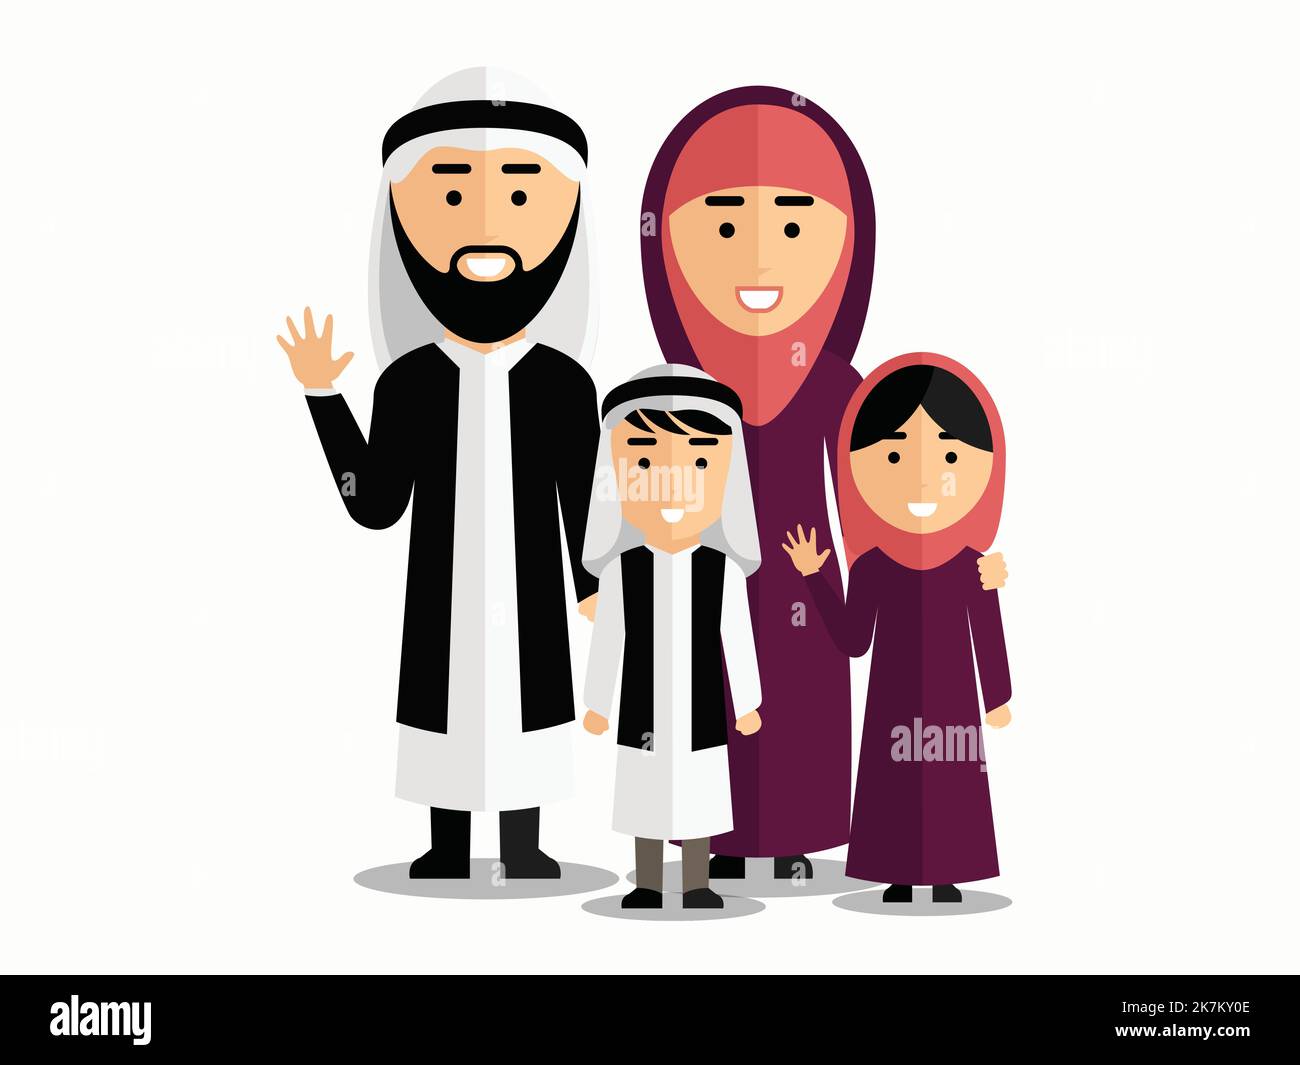 Saudi Muslim family in traditional Islamic outfit vector cartoon character diversity illustration Stock Vector